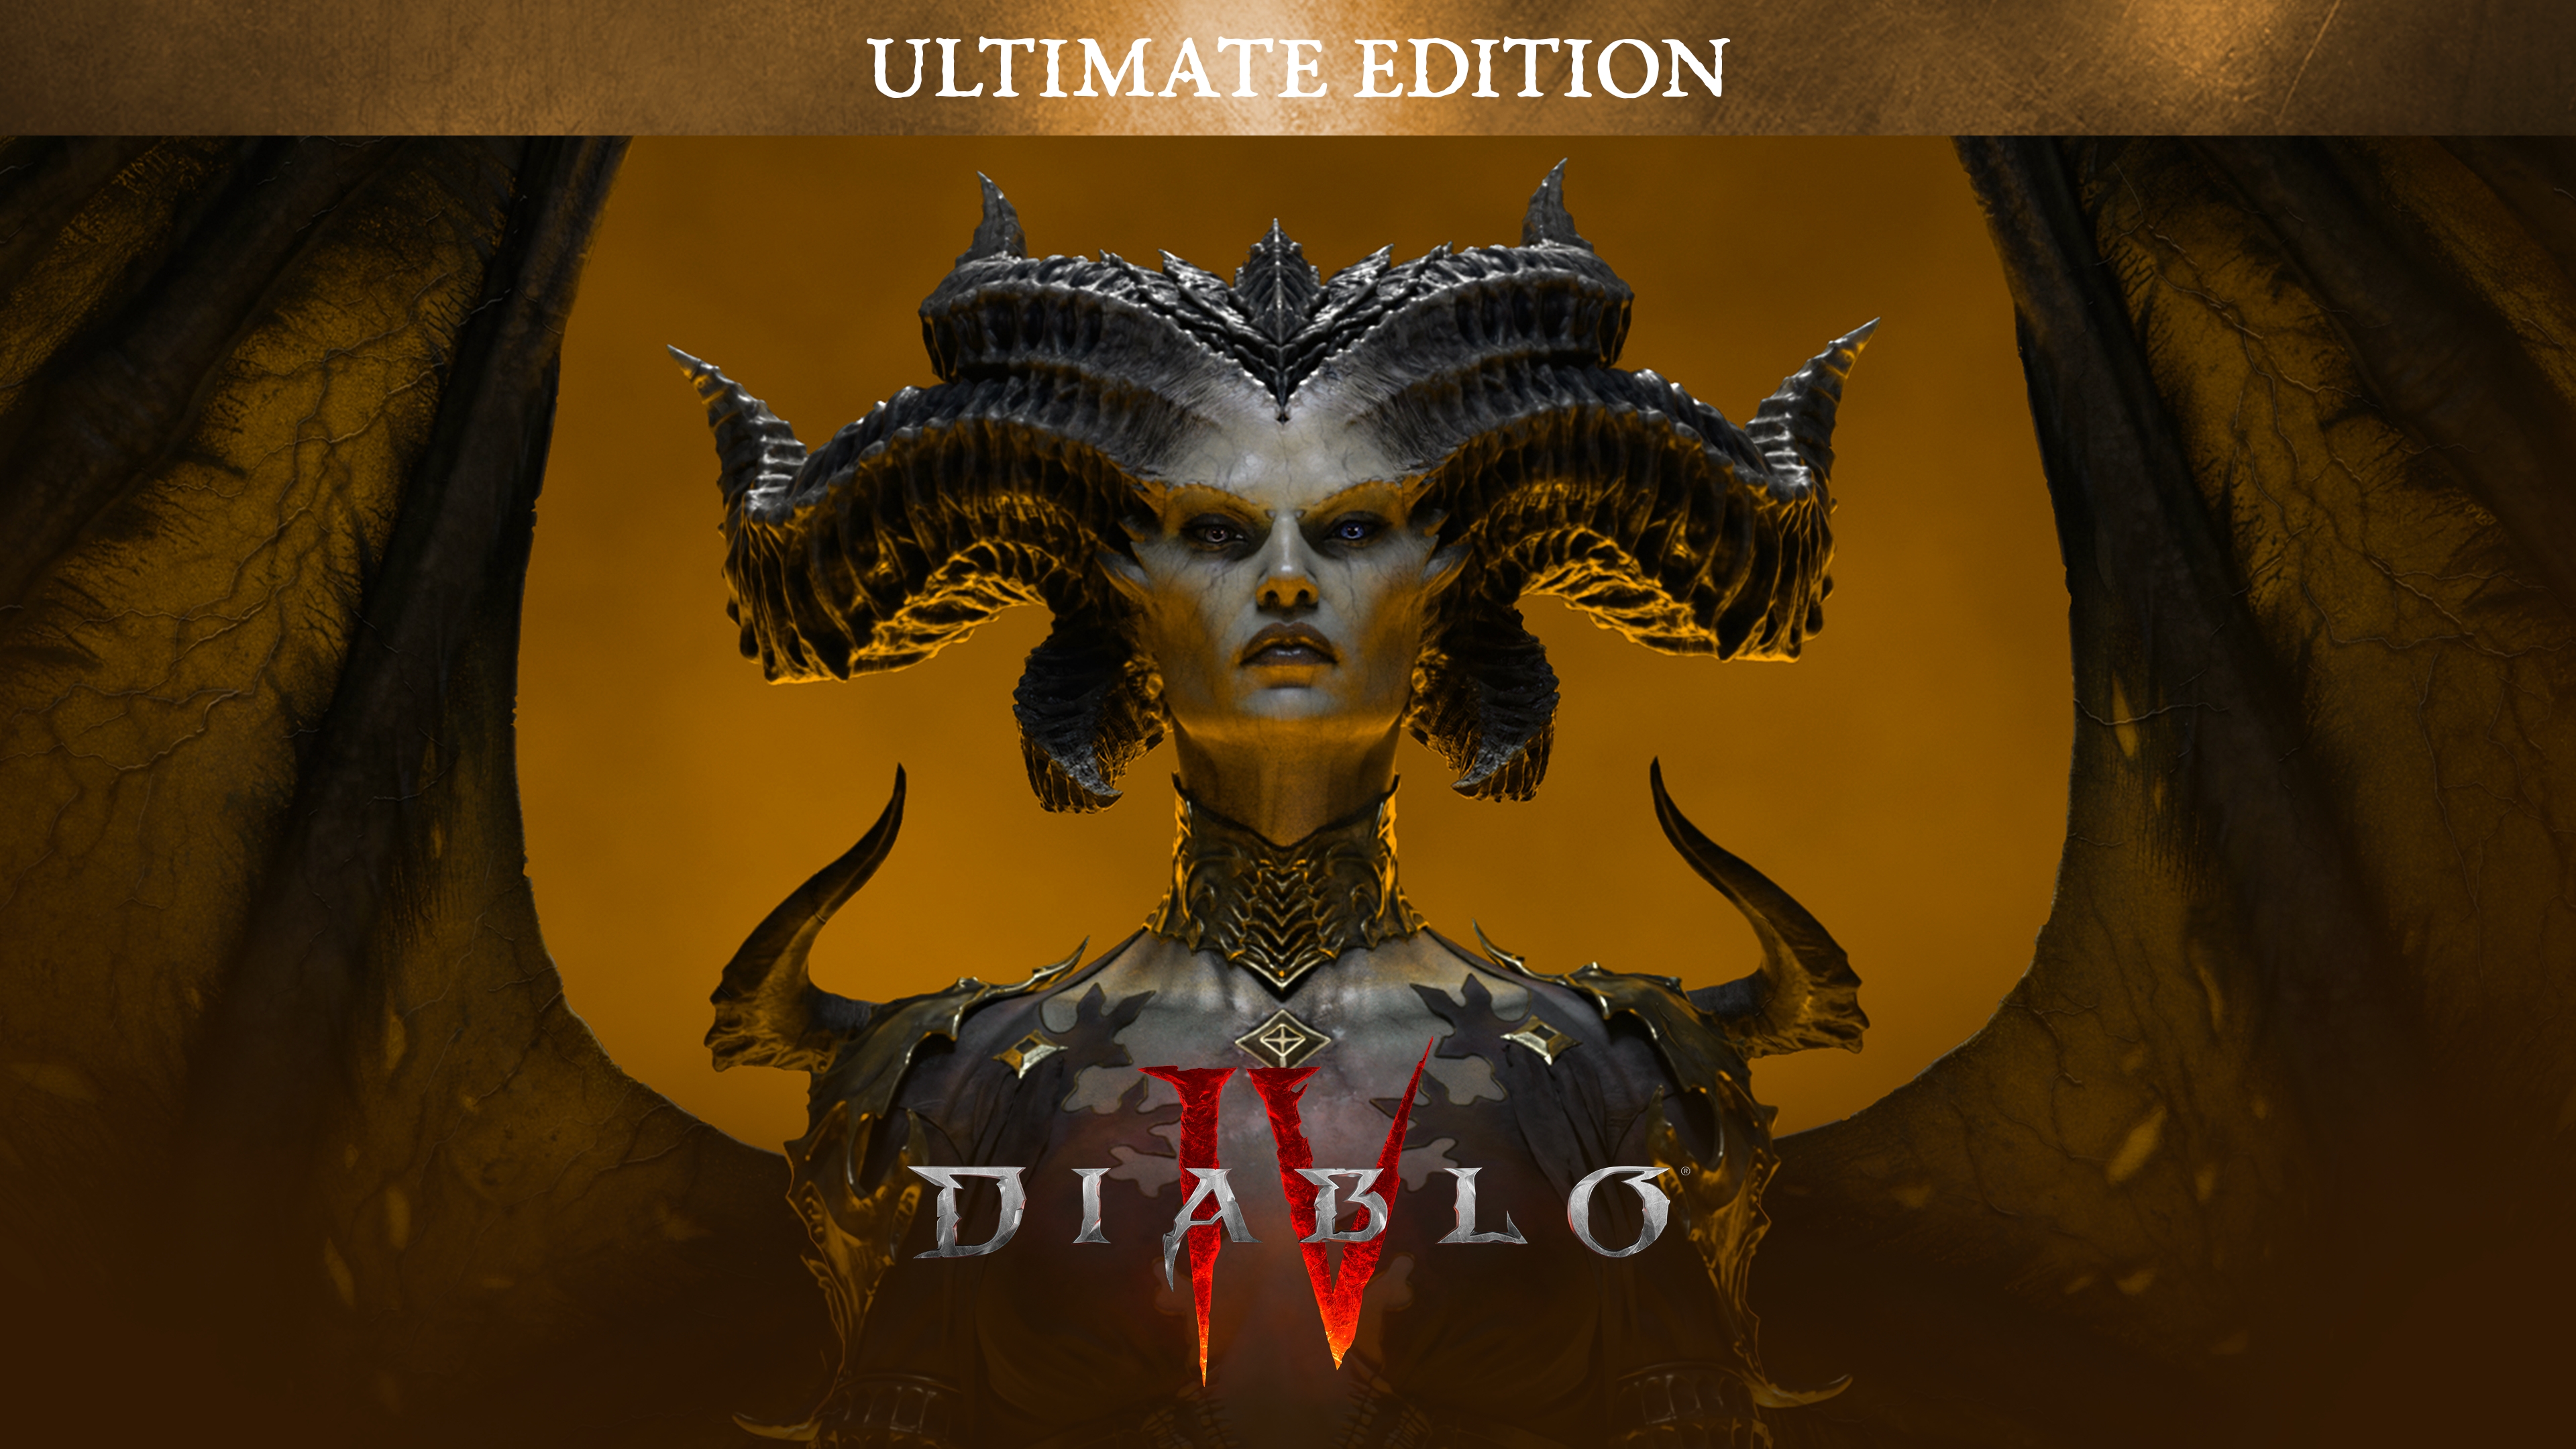 https://gaming-cdn.com/images/products/14387/orig/diablo-iv-ultimate-edition-xbox-one-xbox-series-x-s-ultimate-edition-xbox-series-x-s-xbox-one-jeu-microsoft-store-etats-unis-cover.jpg?v=1686738042